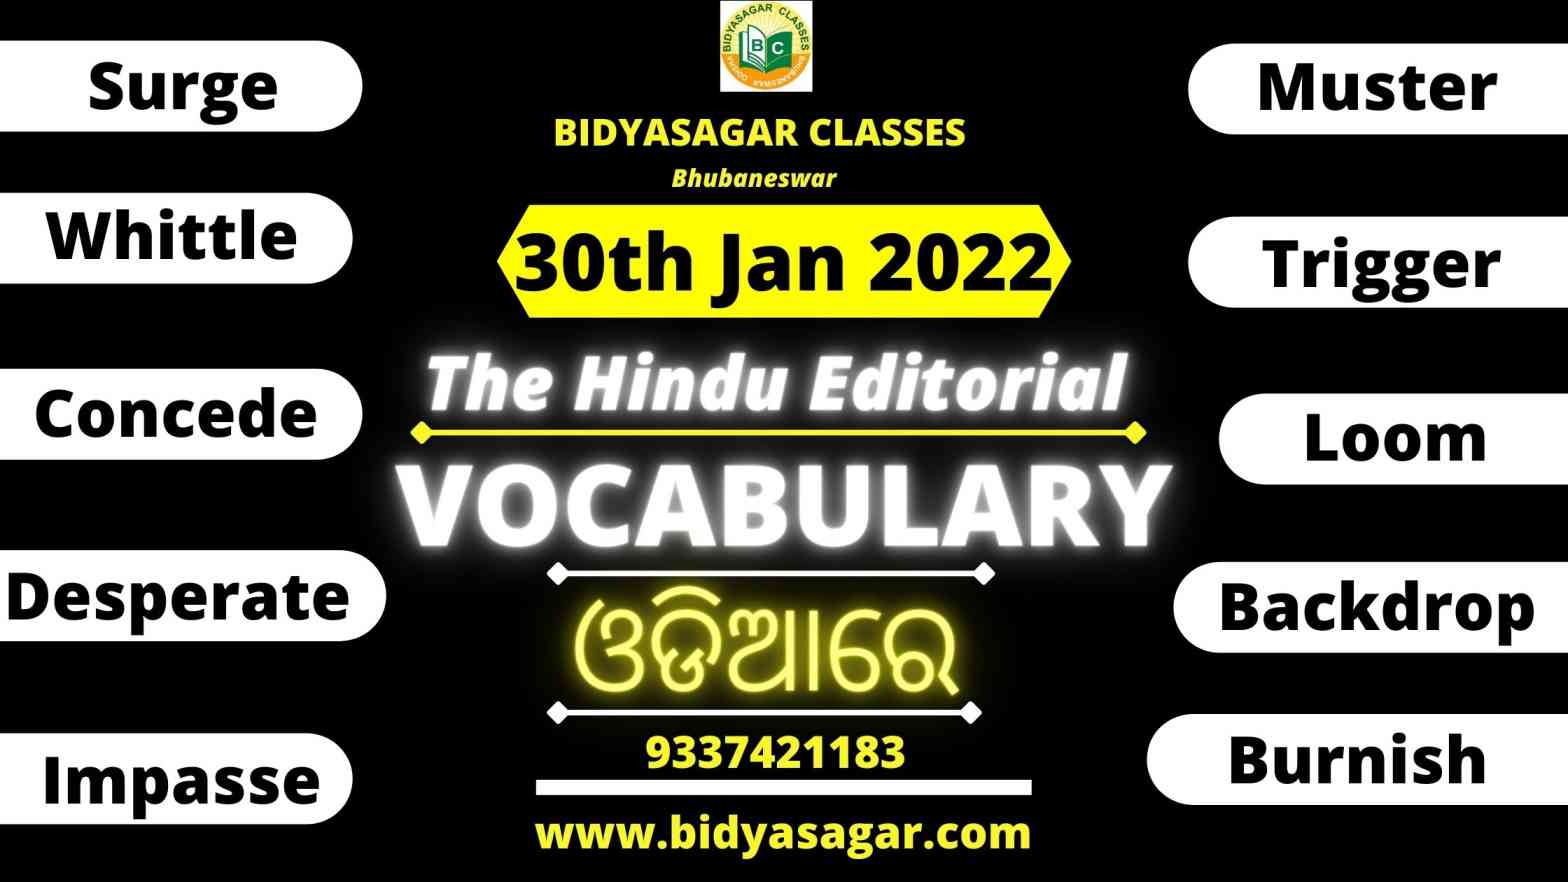 The Hindu Editorial Vocabulary of 30th January 2022